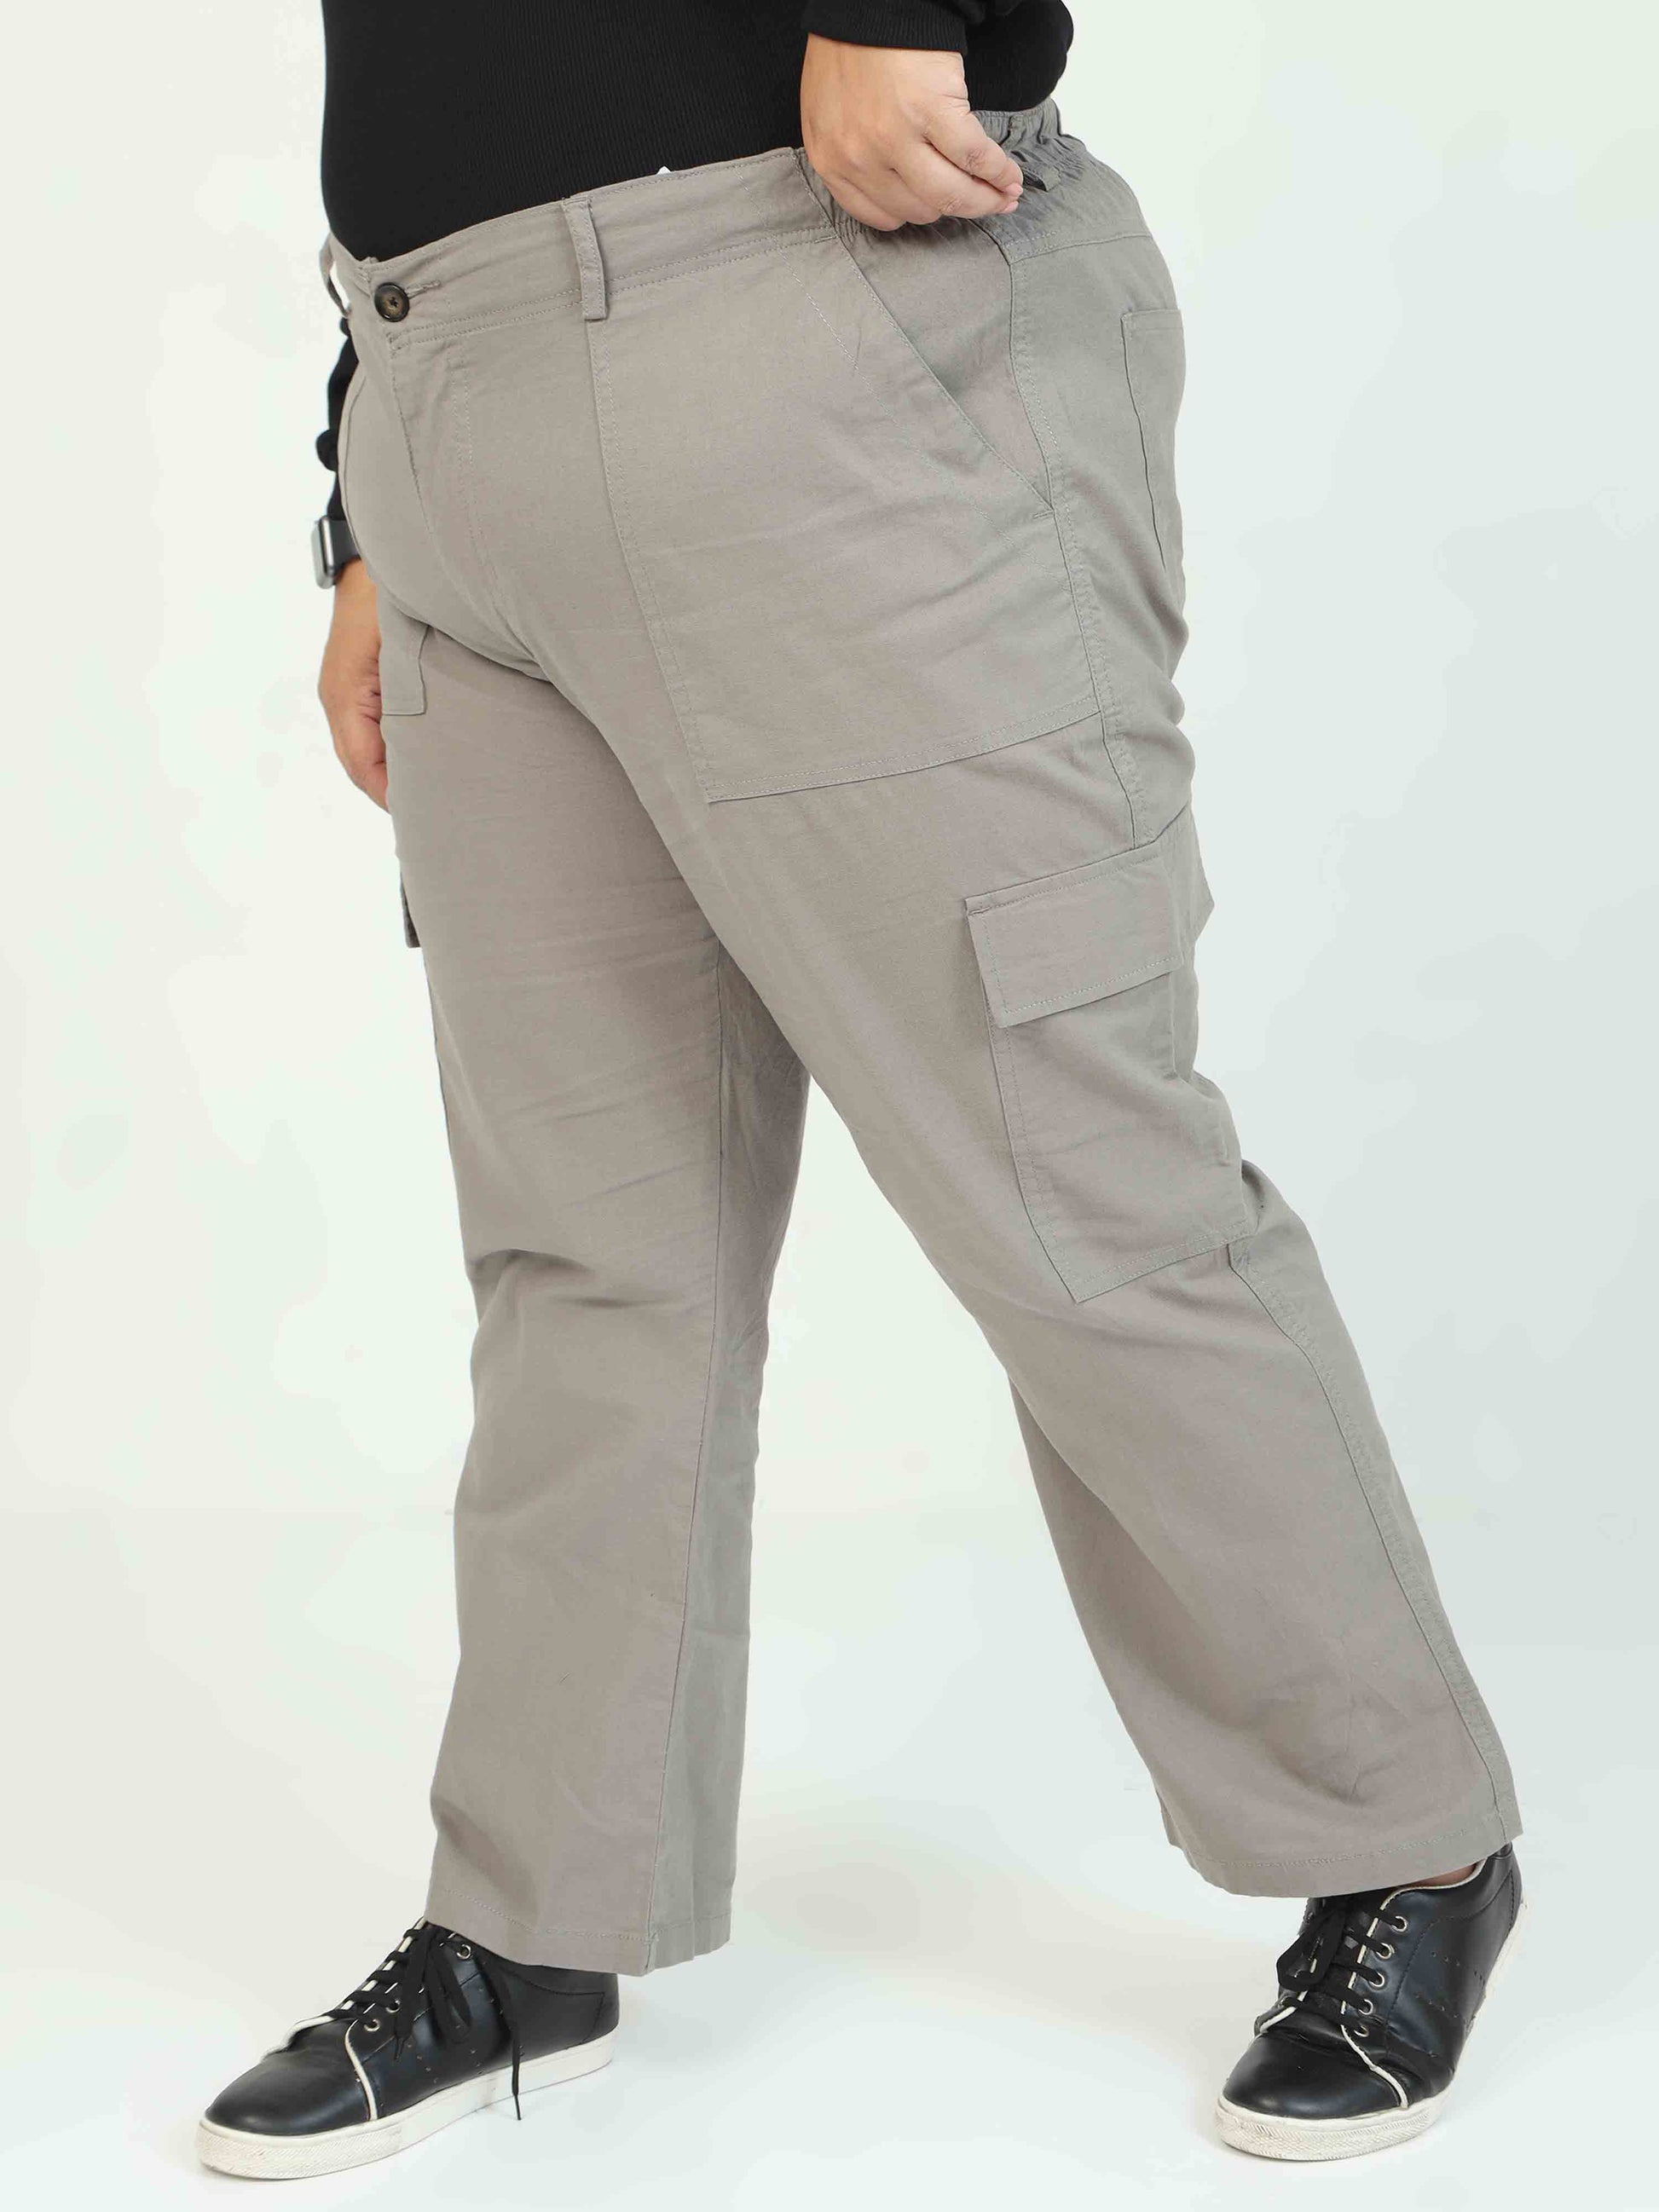 Buy cool and comfortable khaki cargo pants for women – Marquee